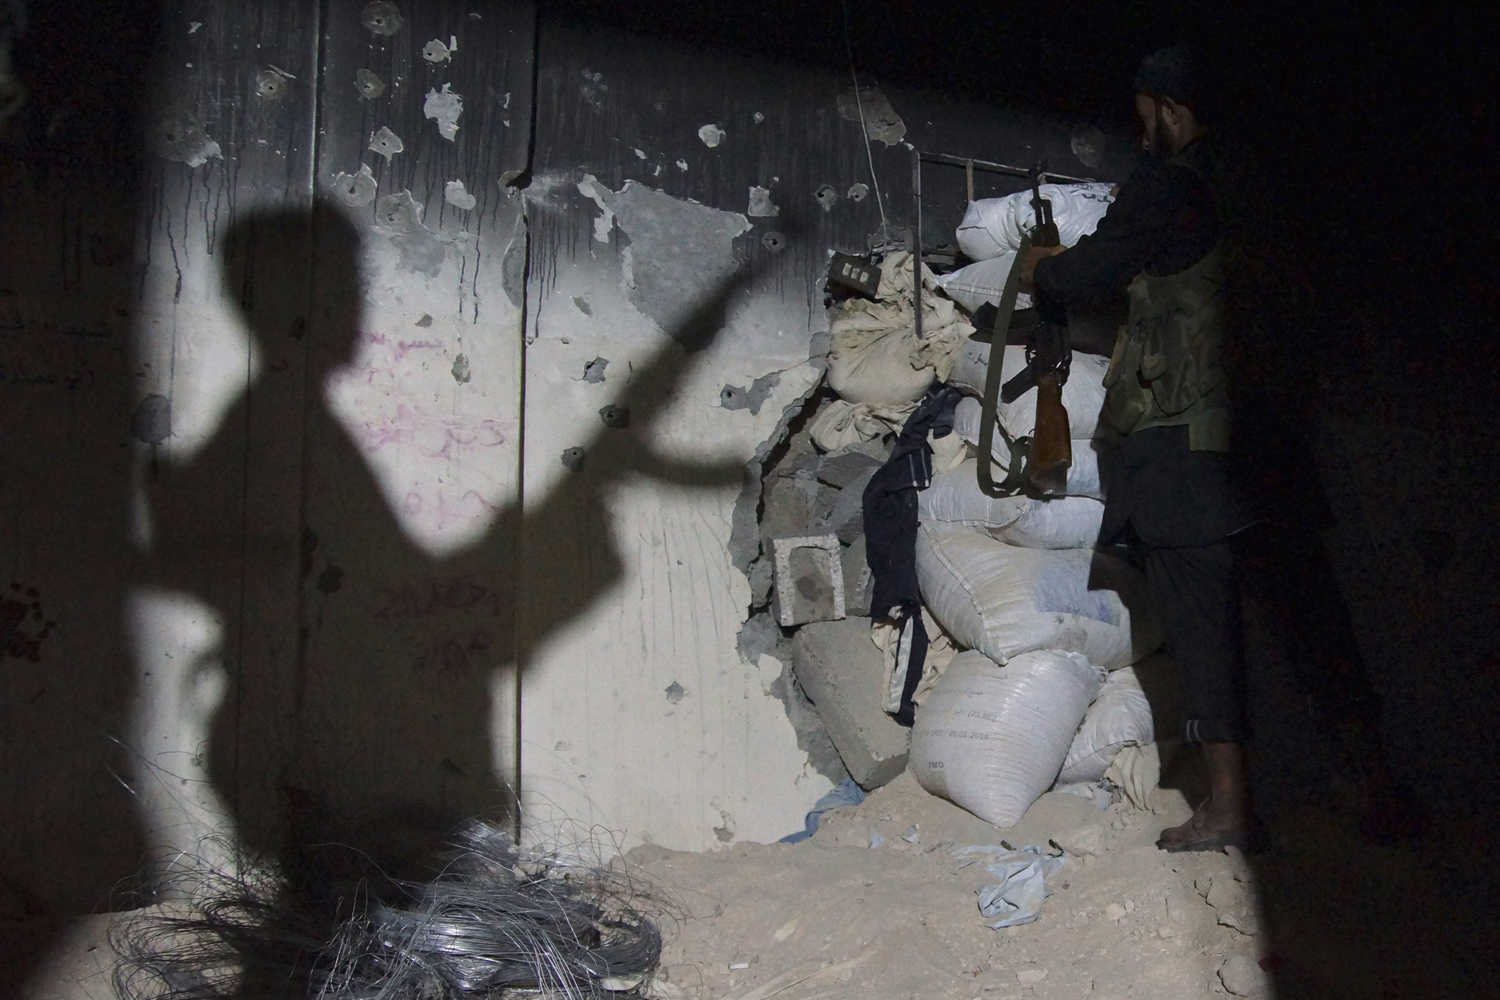 July 18, 2013. A Free Syrian Army fighter (R) carries his weapon as he stands inside a room in Deir al-Zor.